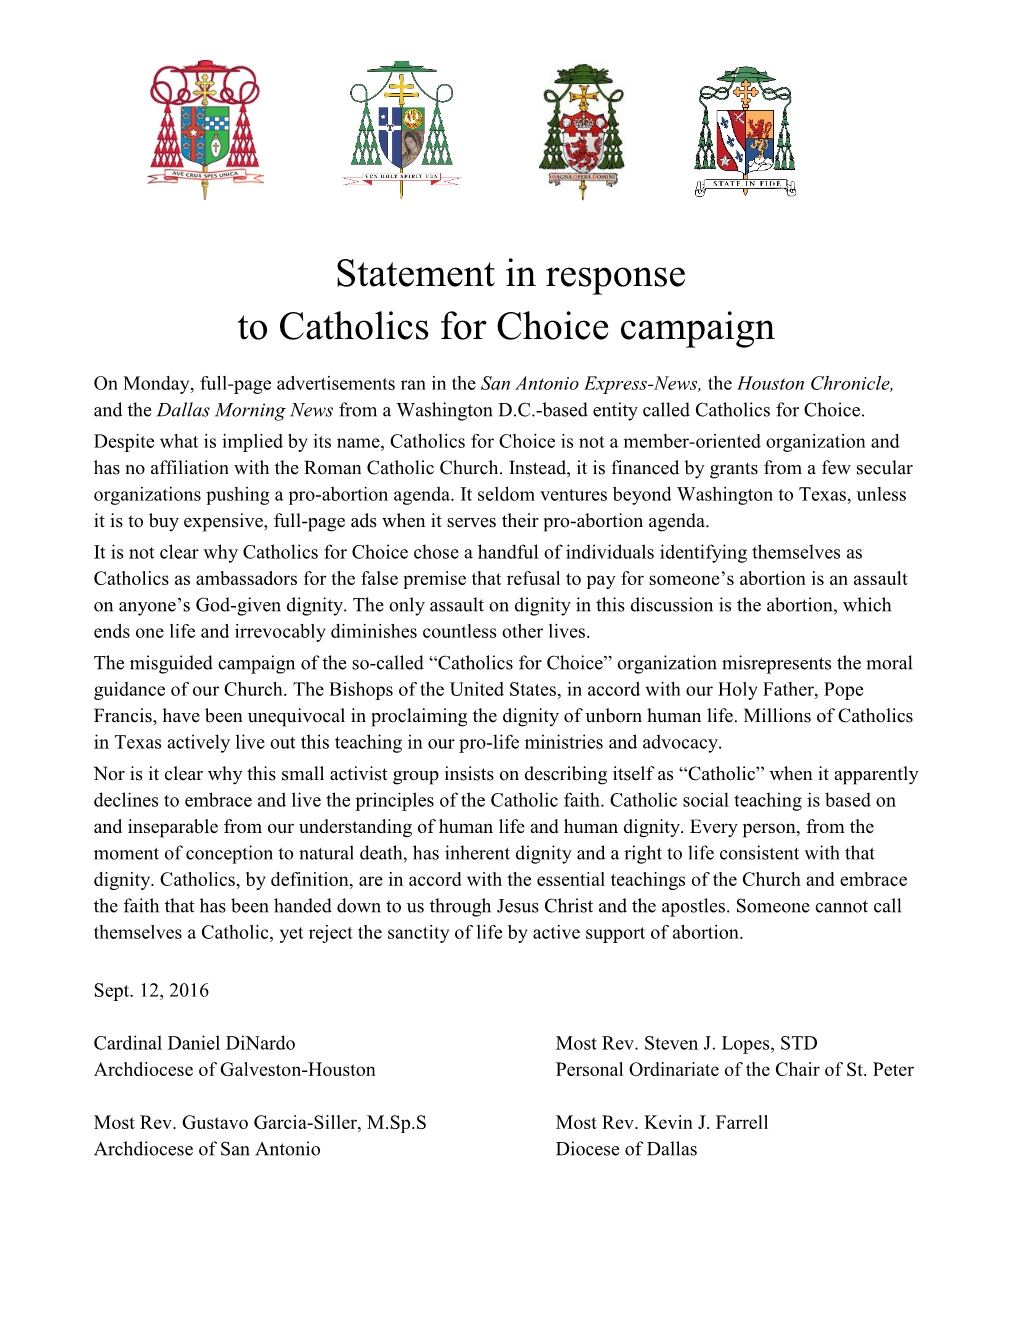 Statement in Response to Catholics for Choice Campaign